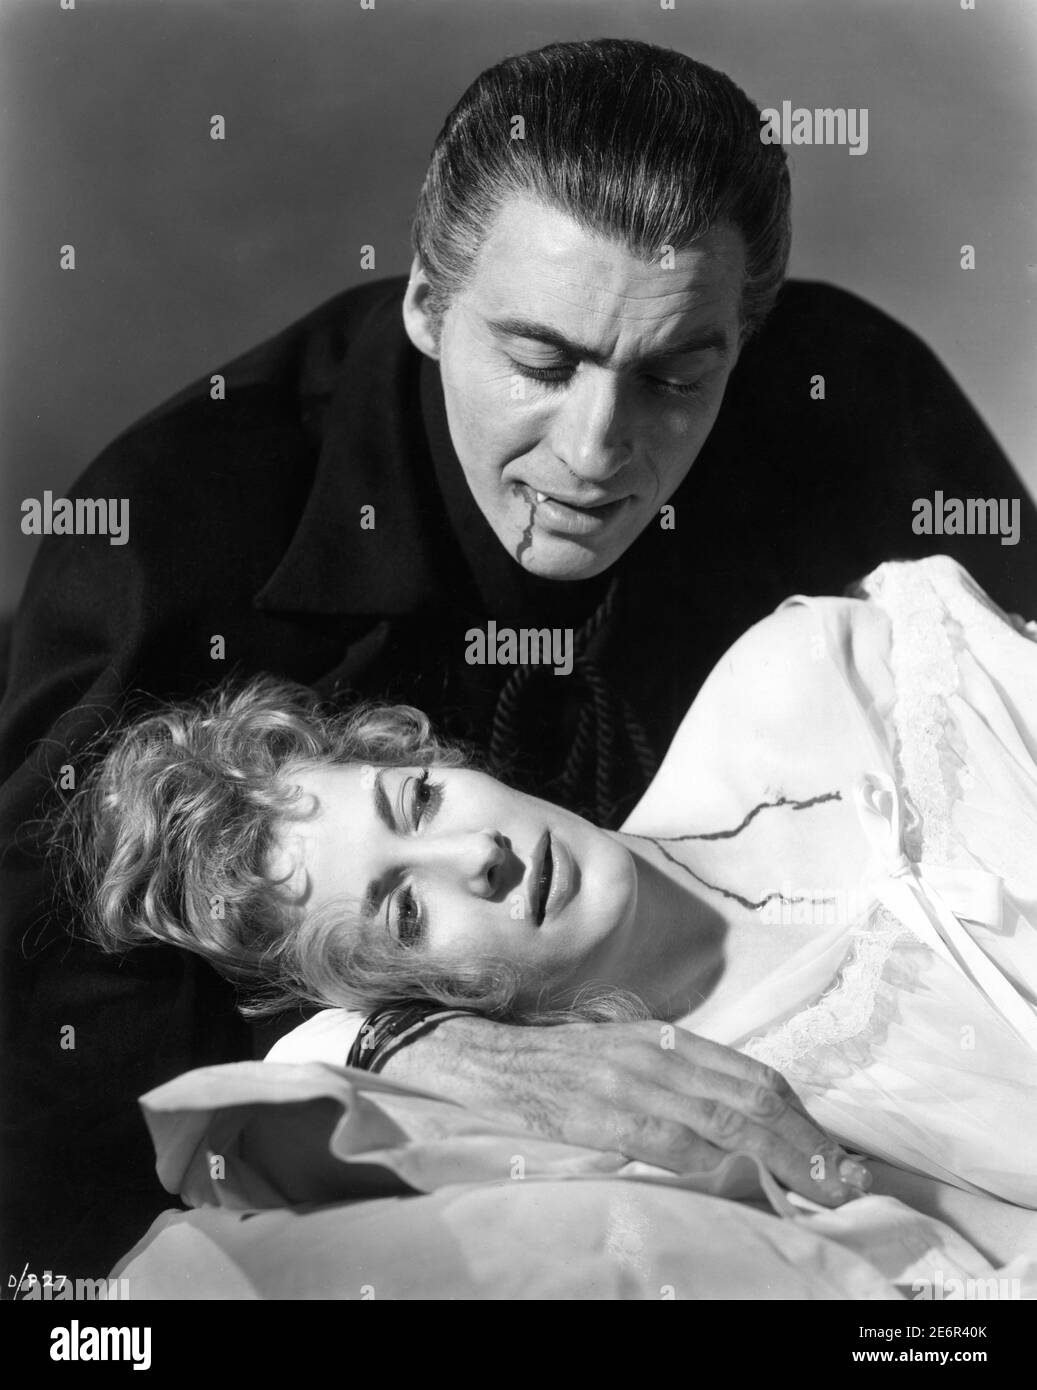 CHISTOPHER LEE as Count Dracula and MELISSA STRIBLING as Mina publicity portrait for DRACULA aka HORROR OF DRACULA 1958 director TERENCE FISHER novel Bram Stoker screenplay Jimmy Sangster Hammer Films / Rank Film Distributors (UK) / Universal Pictures (US) Stock Photo